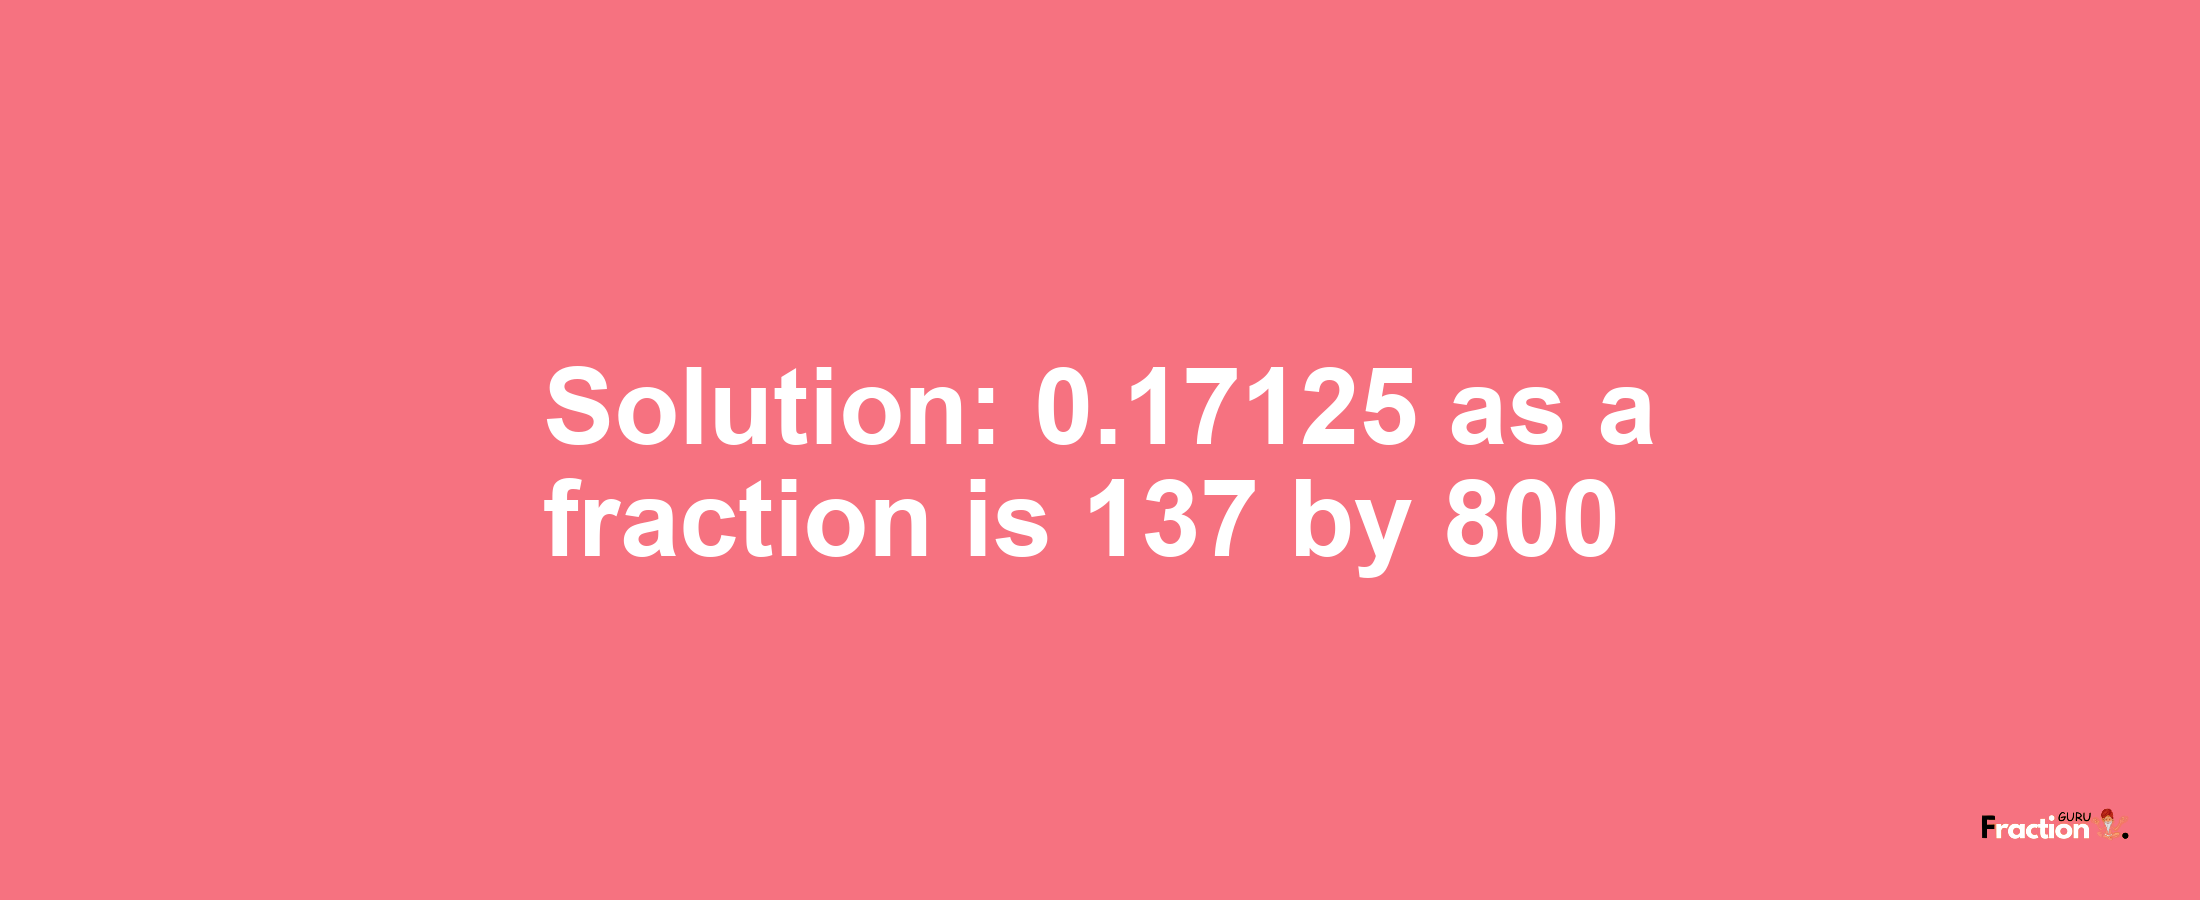 Solution:0.17125 as a fraction is 137/800